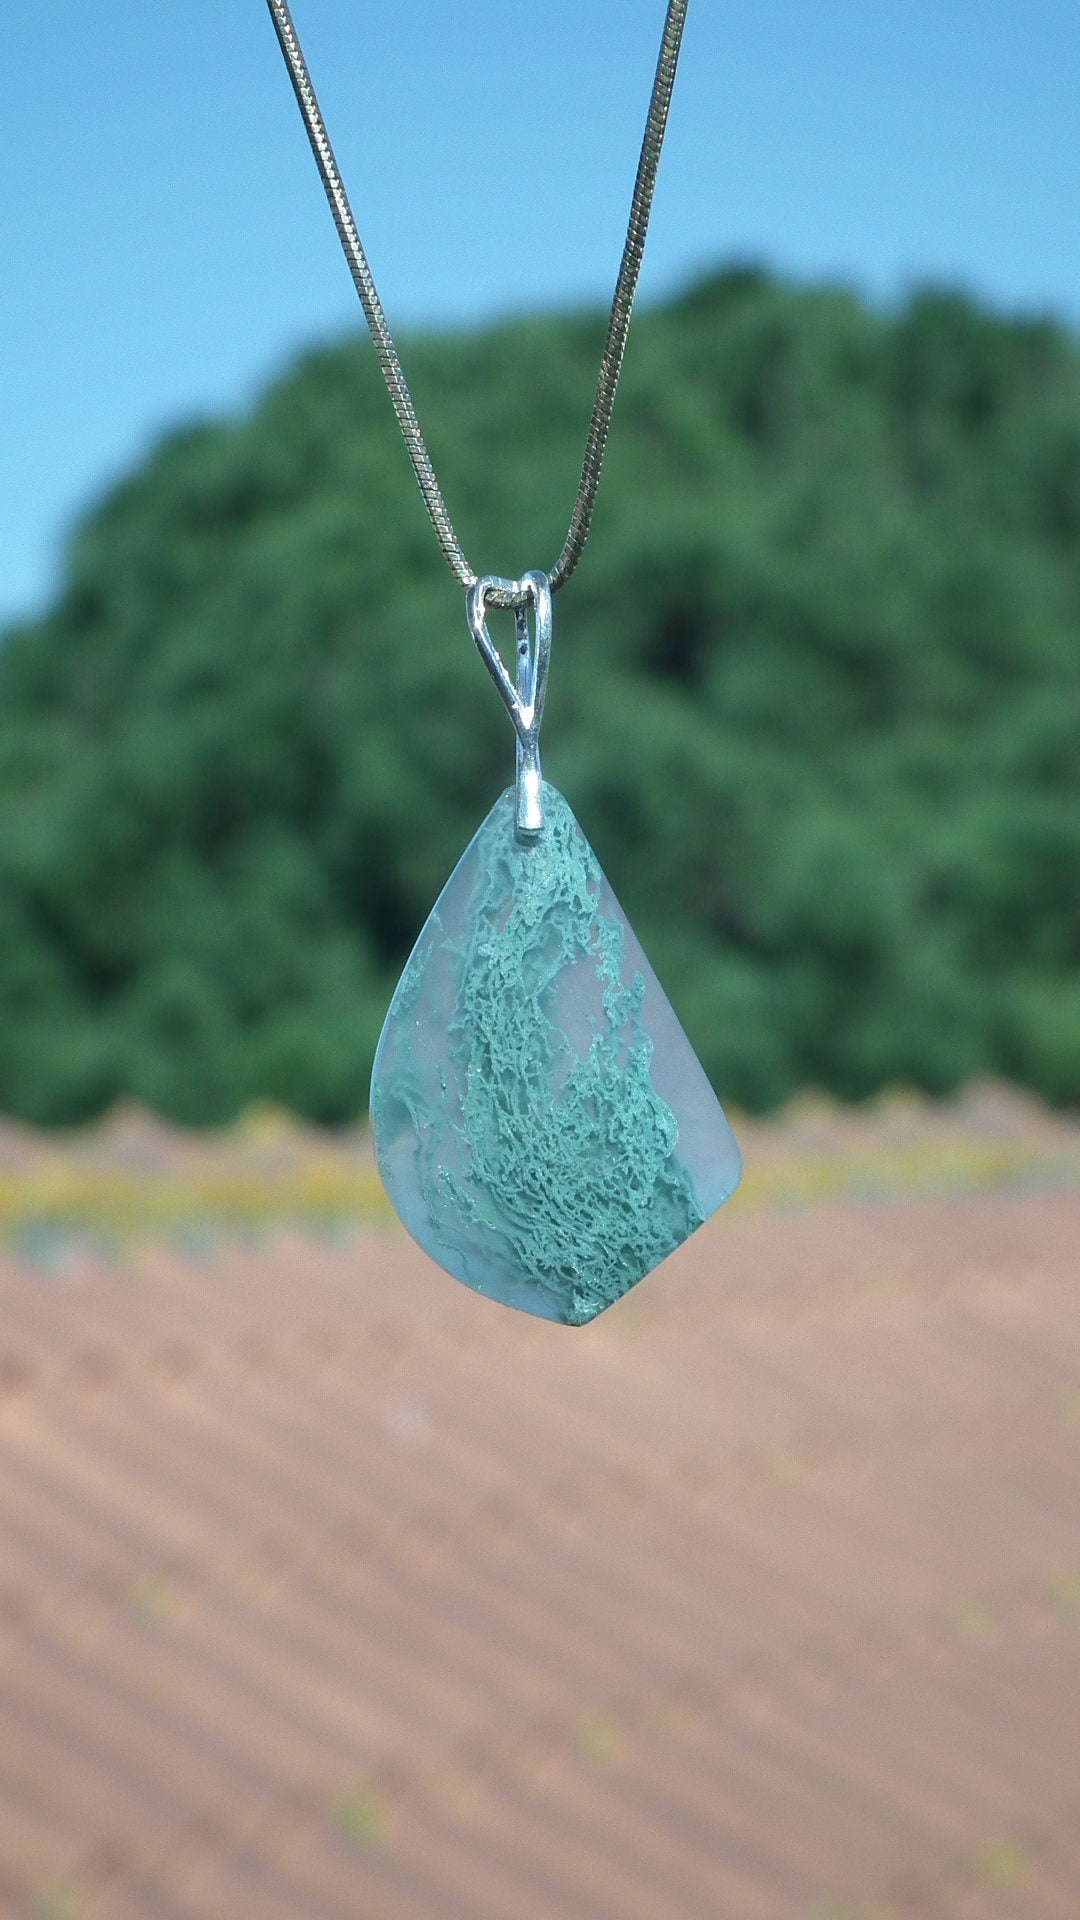 Mossagate pendant with sterling silver bail